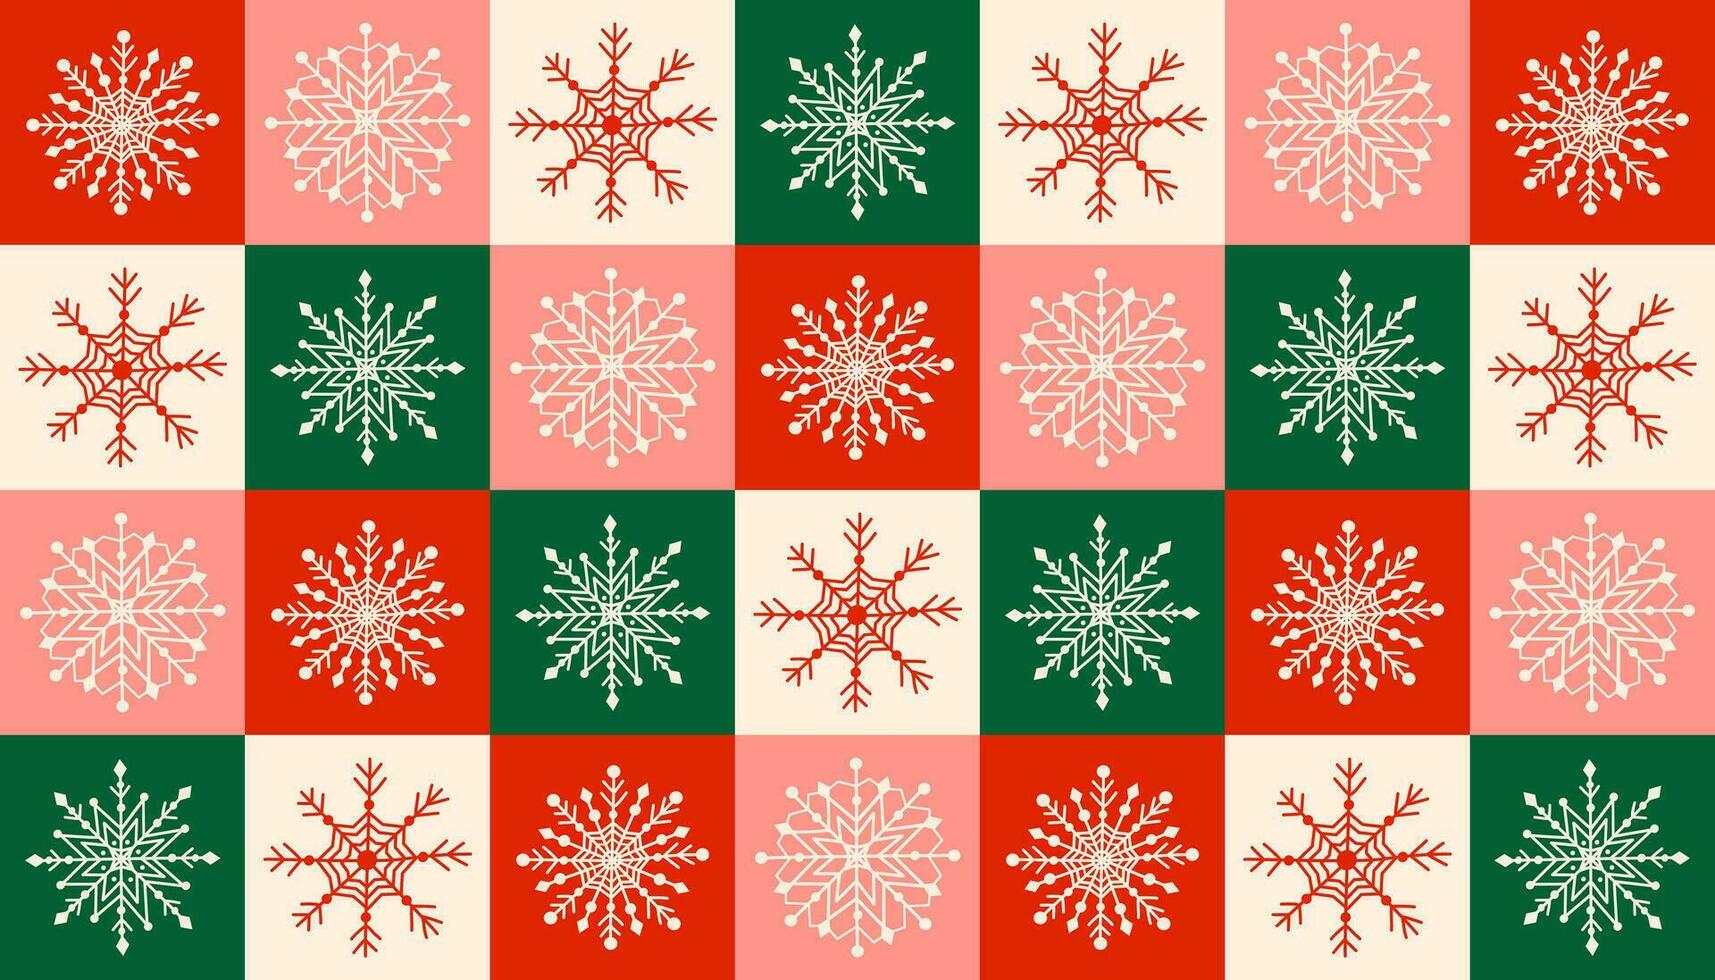 Checkered snowflakes seamless pattern background. Trendy bold geometric ornament. Vector illustration design for winter holidays decoration, banner, wrapper, textile, fabric.